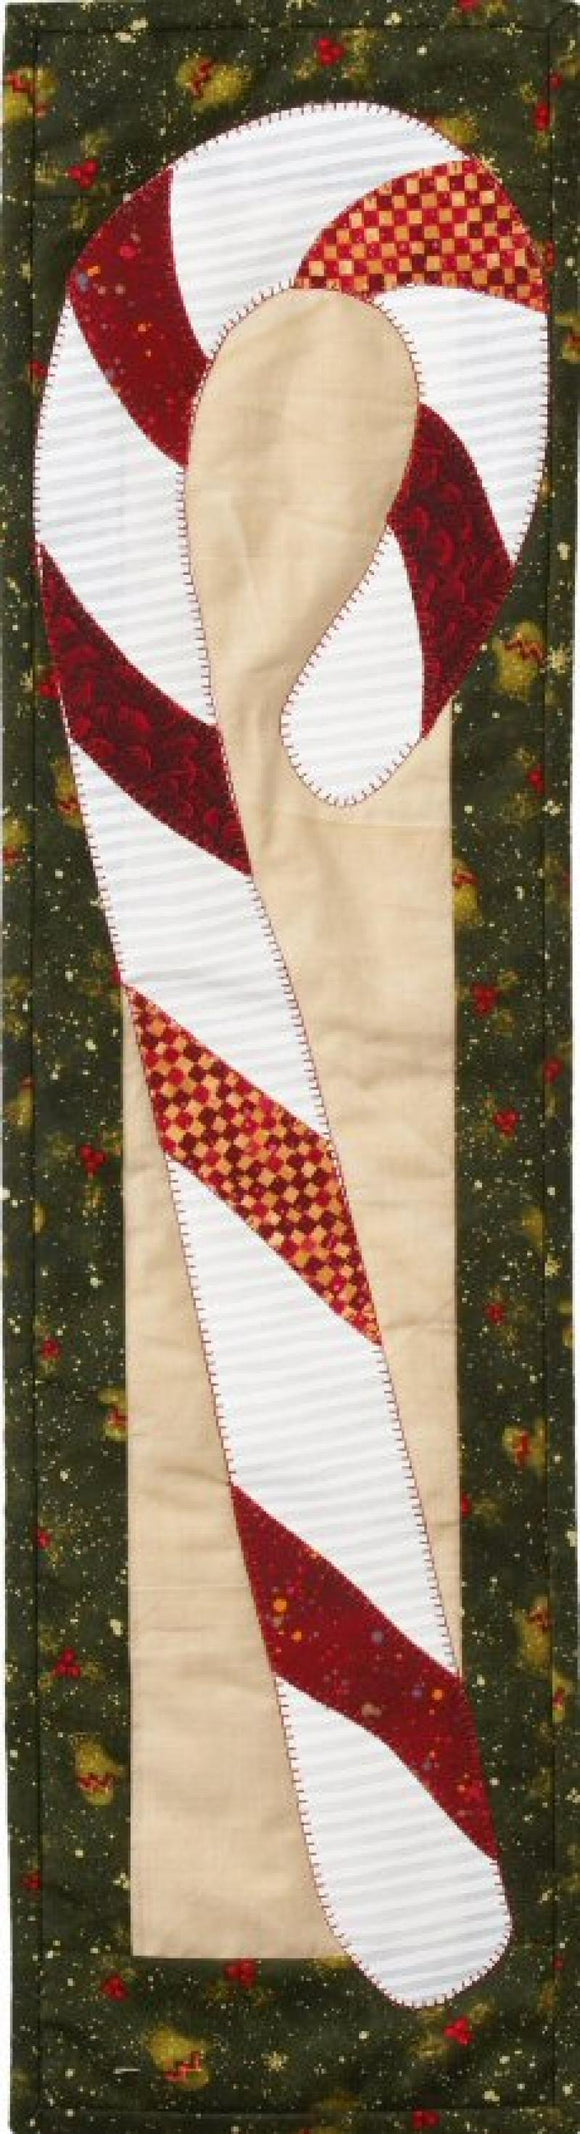 Candy Cane Downloadable Pattern by Patch Abilities